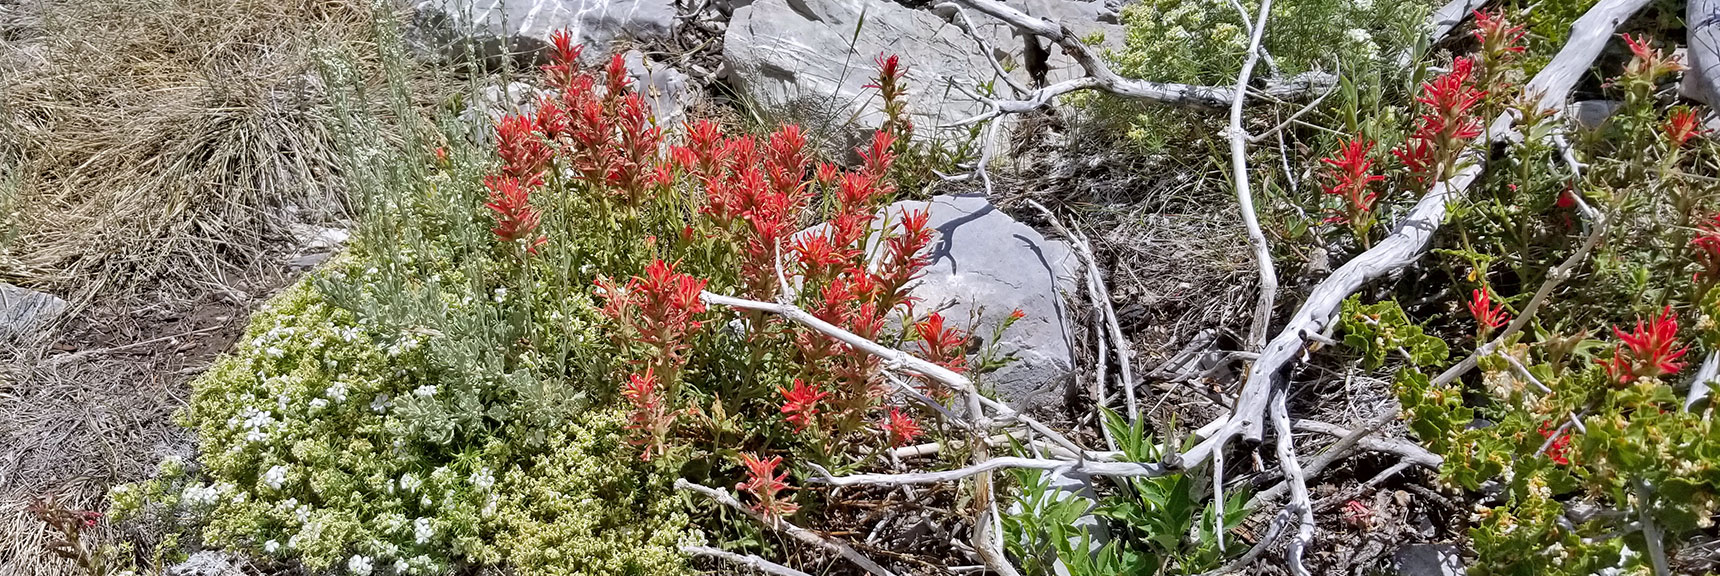 Wild Flowers on the Western Approach Ridge to Harris Mountain | Six Peak Circuit Adventure in the Spring Mountains, Nevada